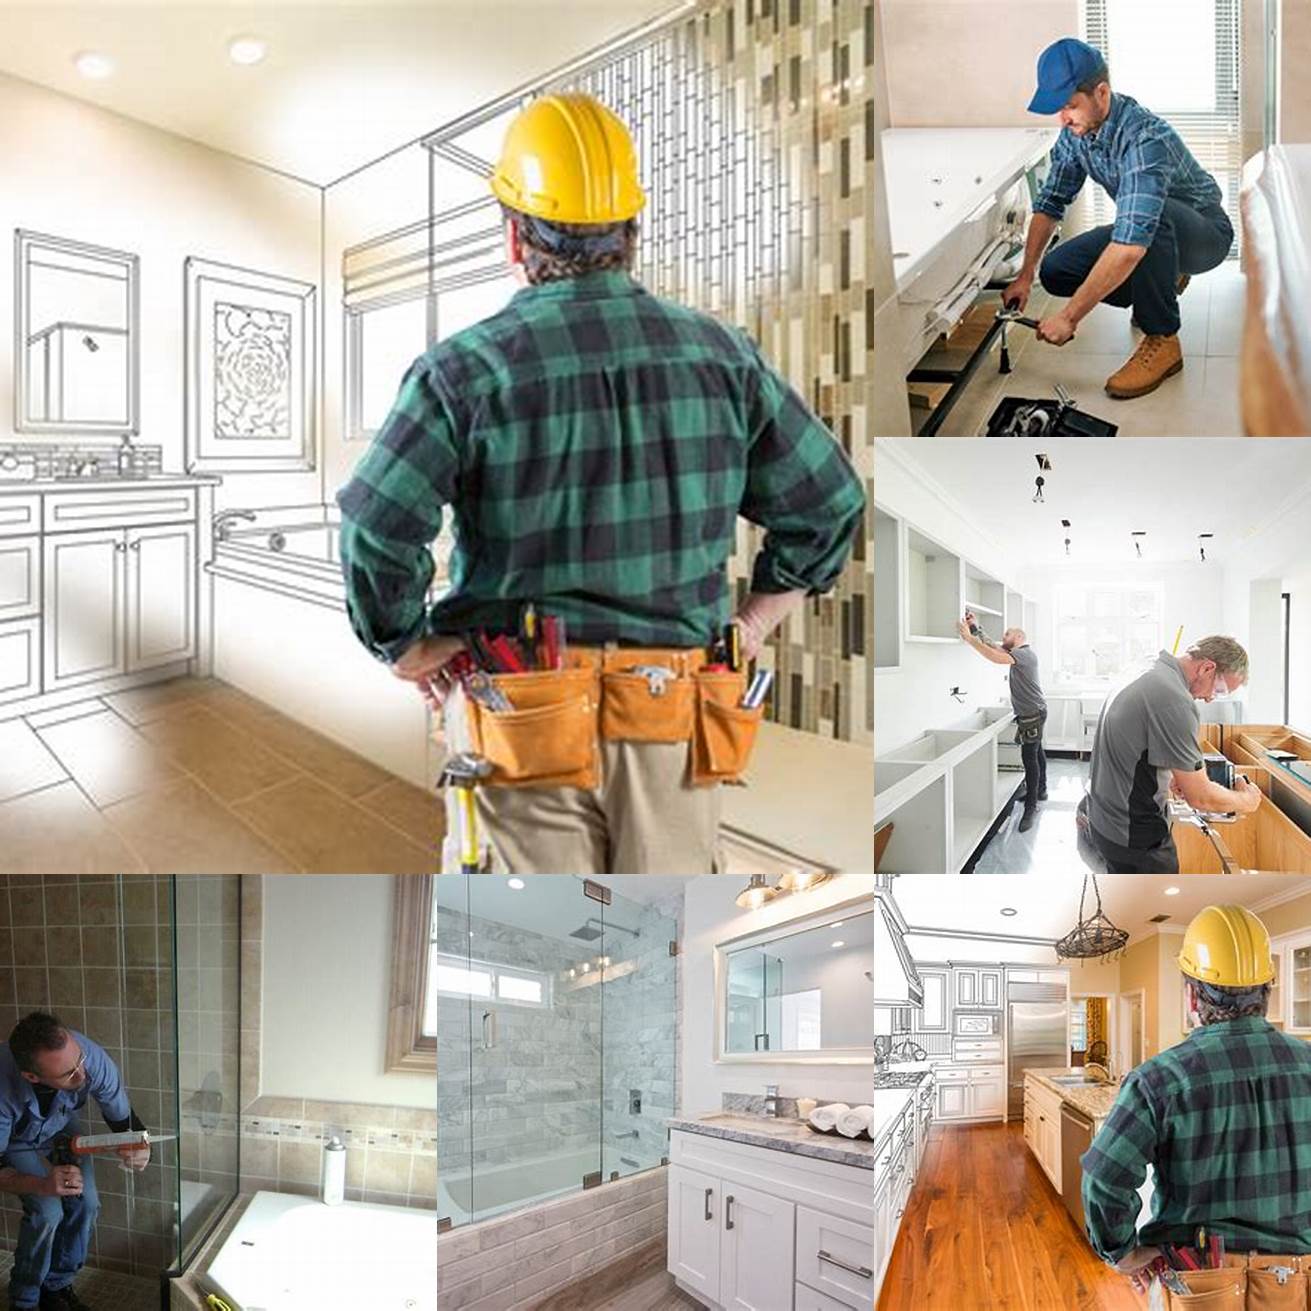 Home improvement contractors If youre doing a bathroom renovation consider hiring a home improvement contractor who can help you select and install a bathroom vanity